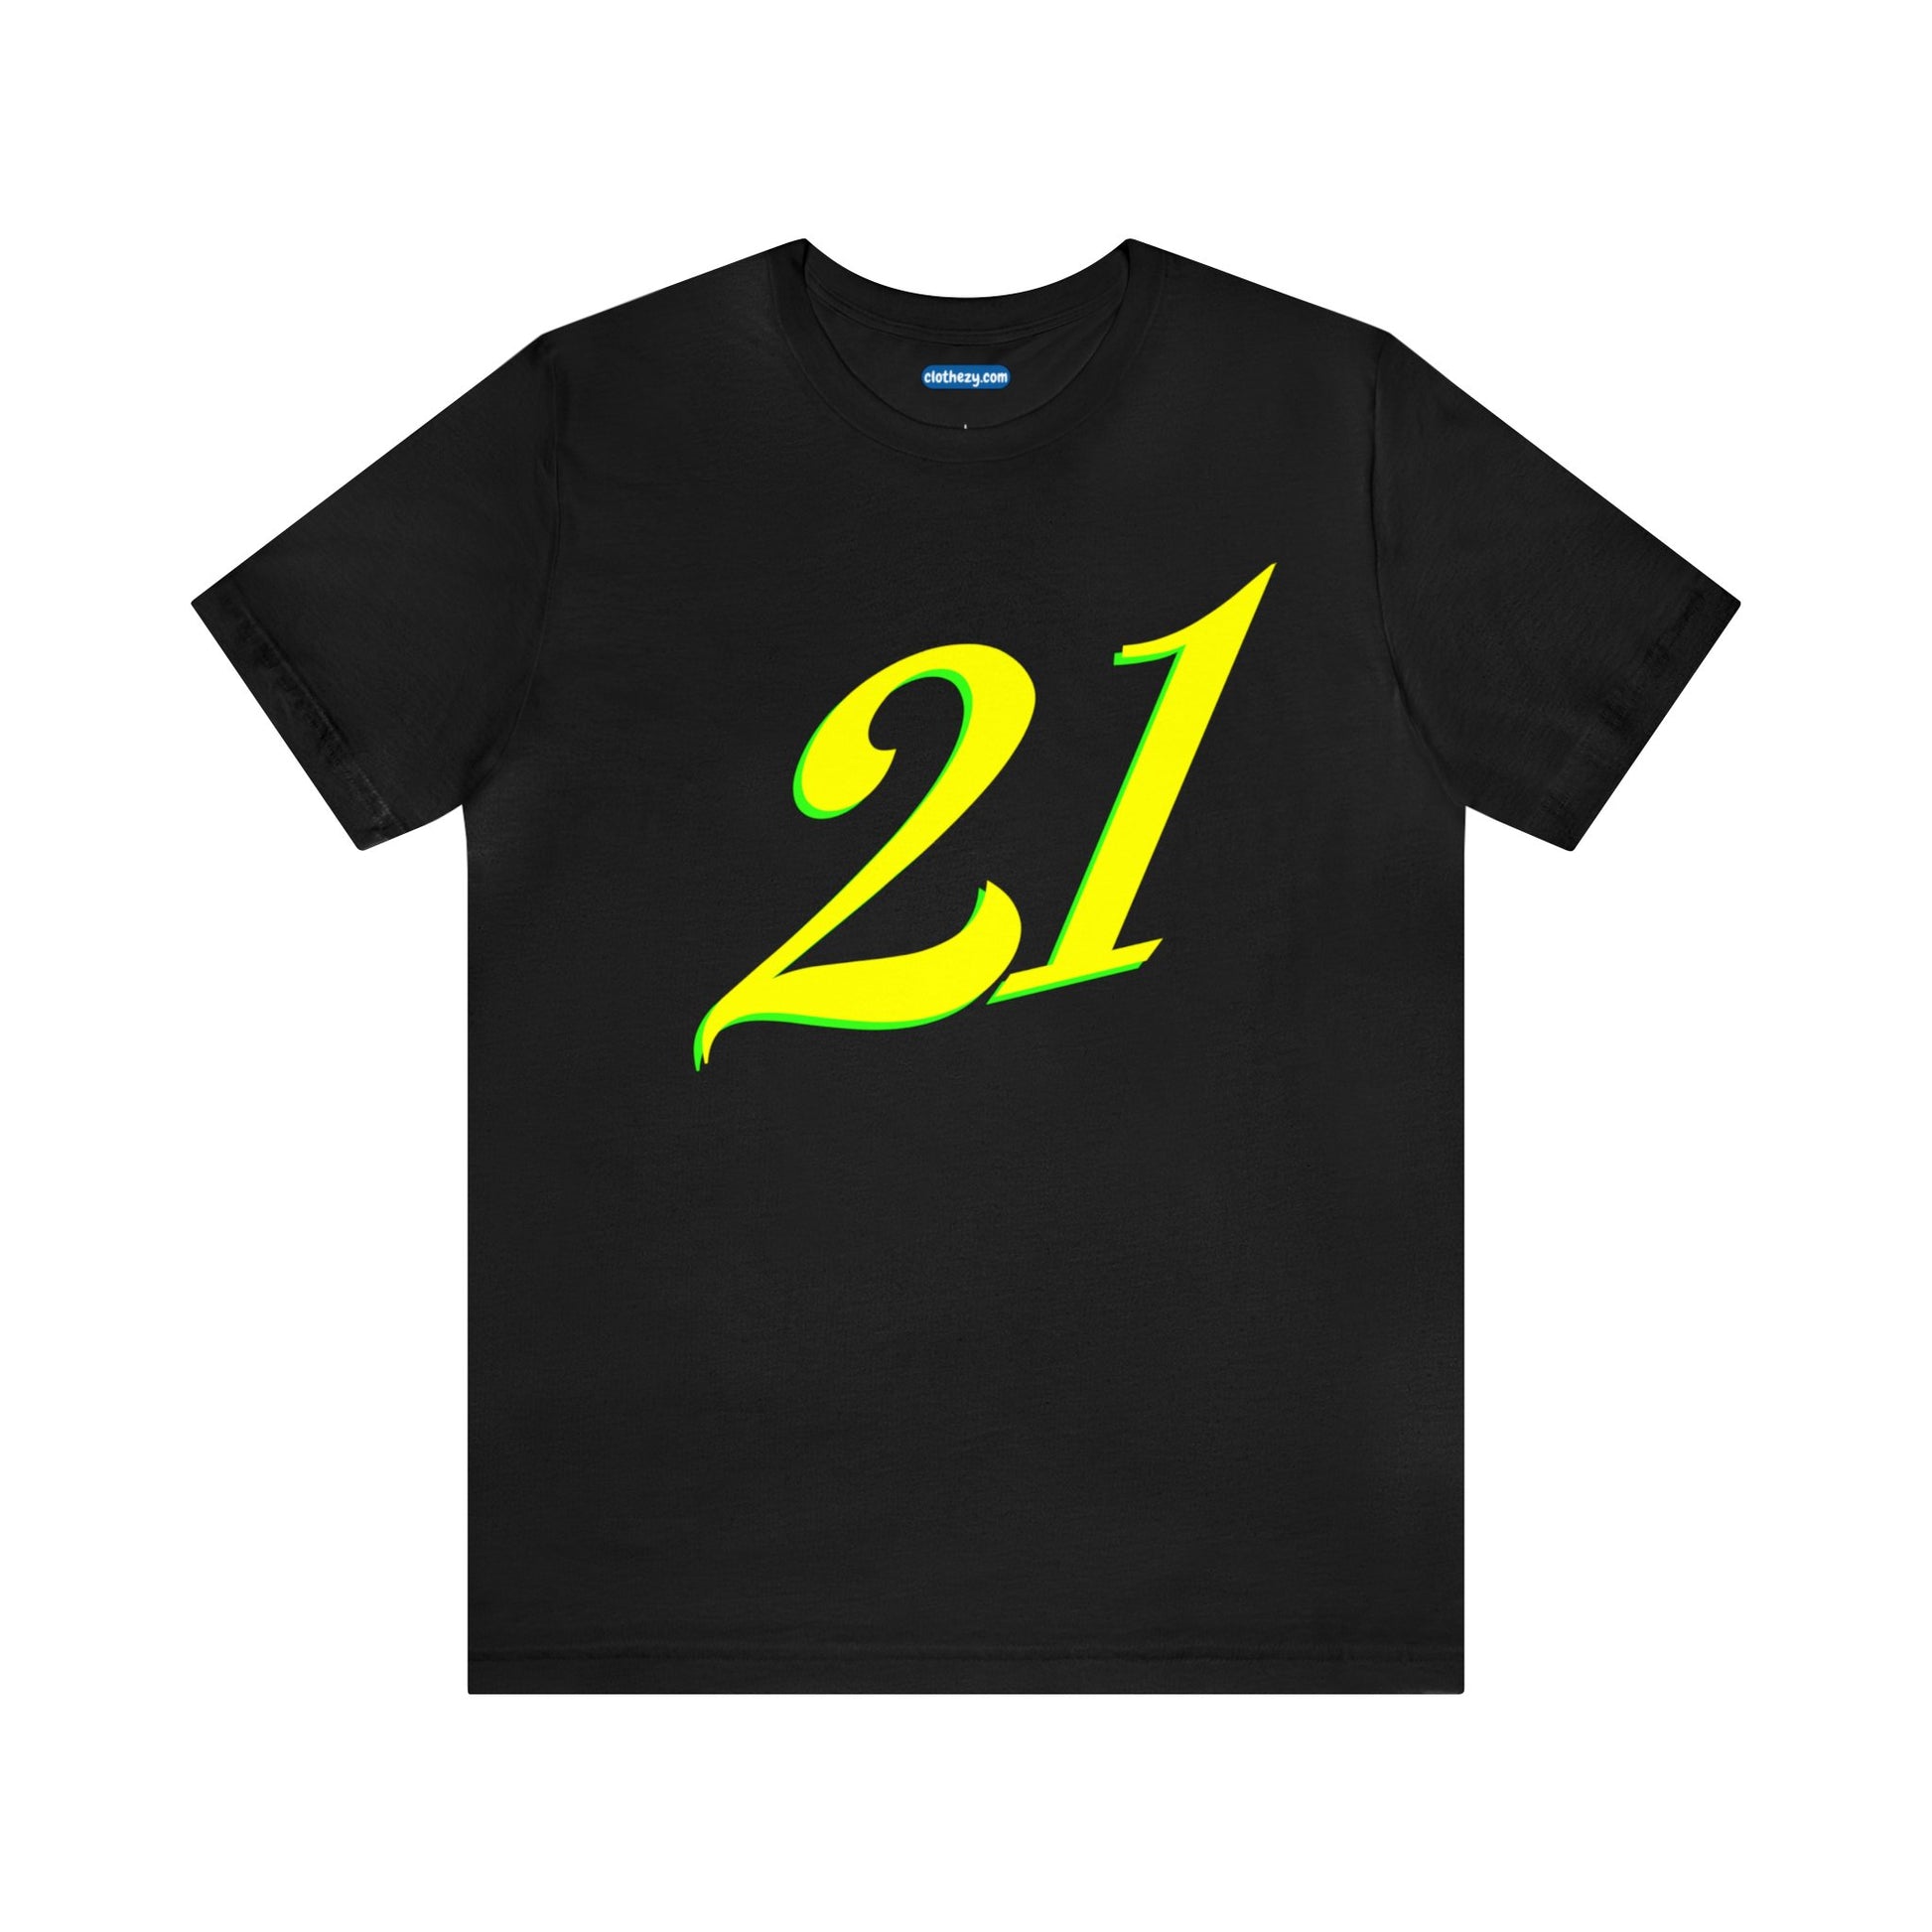 Number 21 Design - Soft Cotton Tee for birthdays and celebrations, Gift for friends and family, Multiple Options by clothezy.com in Dark Grey Heather Size Small - Buy Now